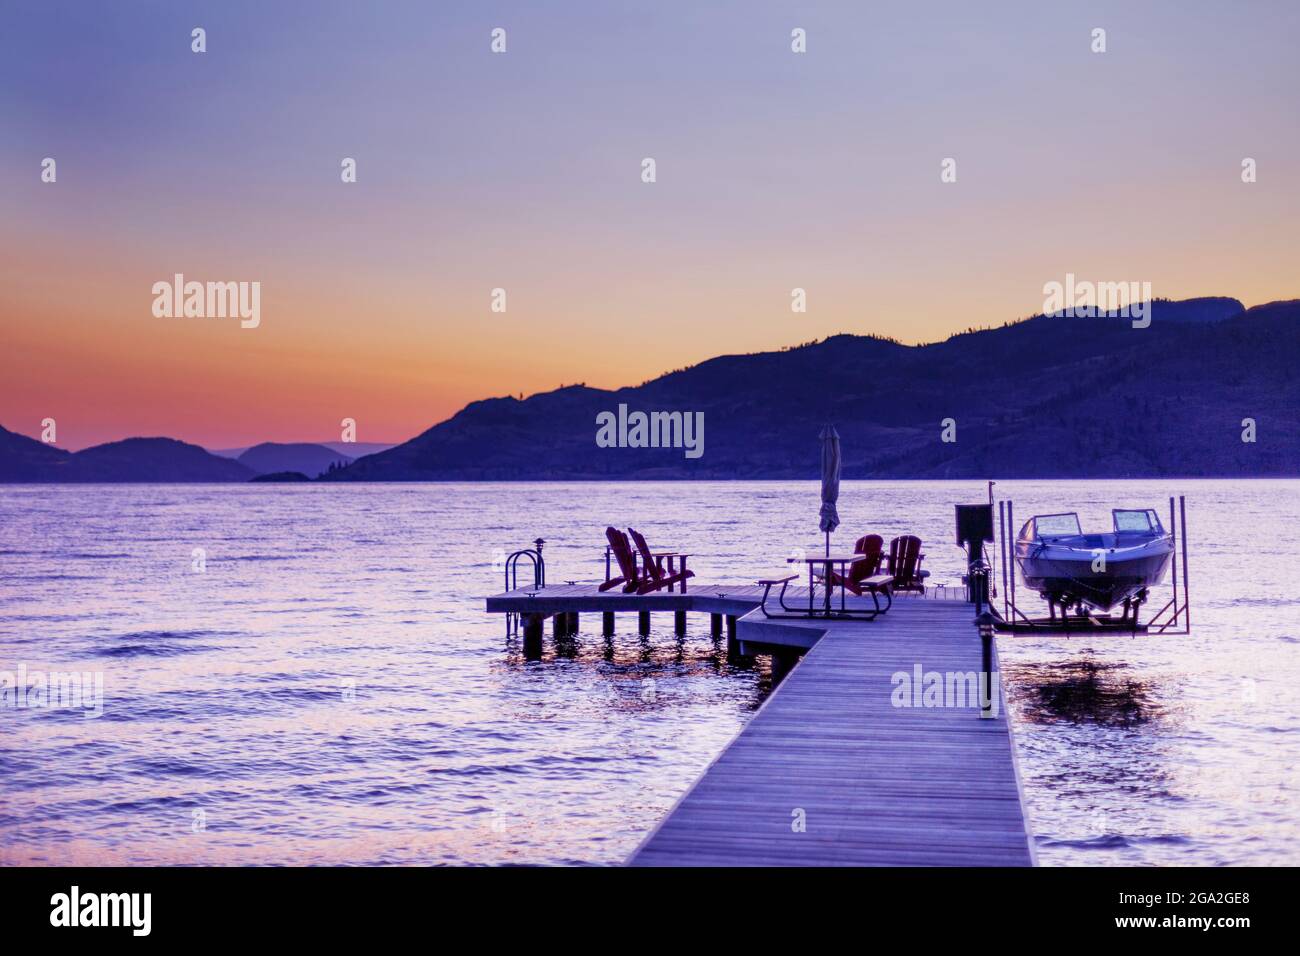 Adirondack chairs and a picnic table sit on a wooden dock with a boat and lift on Okanagan Lake at sunset; British Columbia, Canada Stock Photo